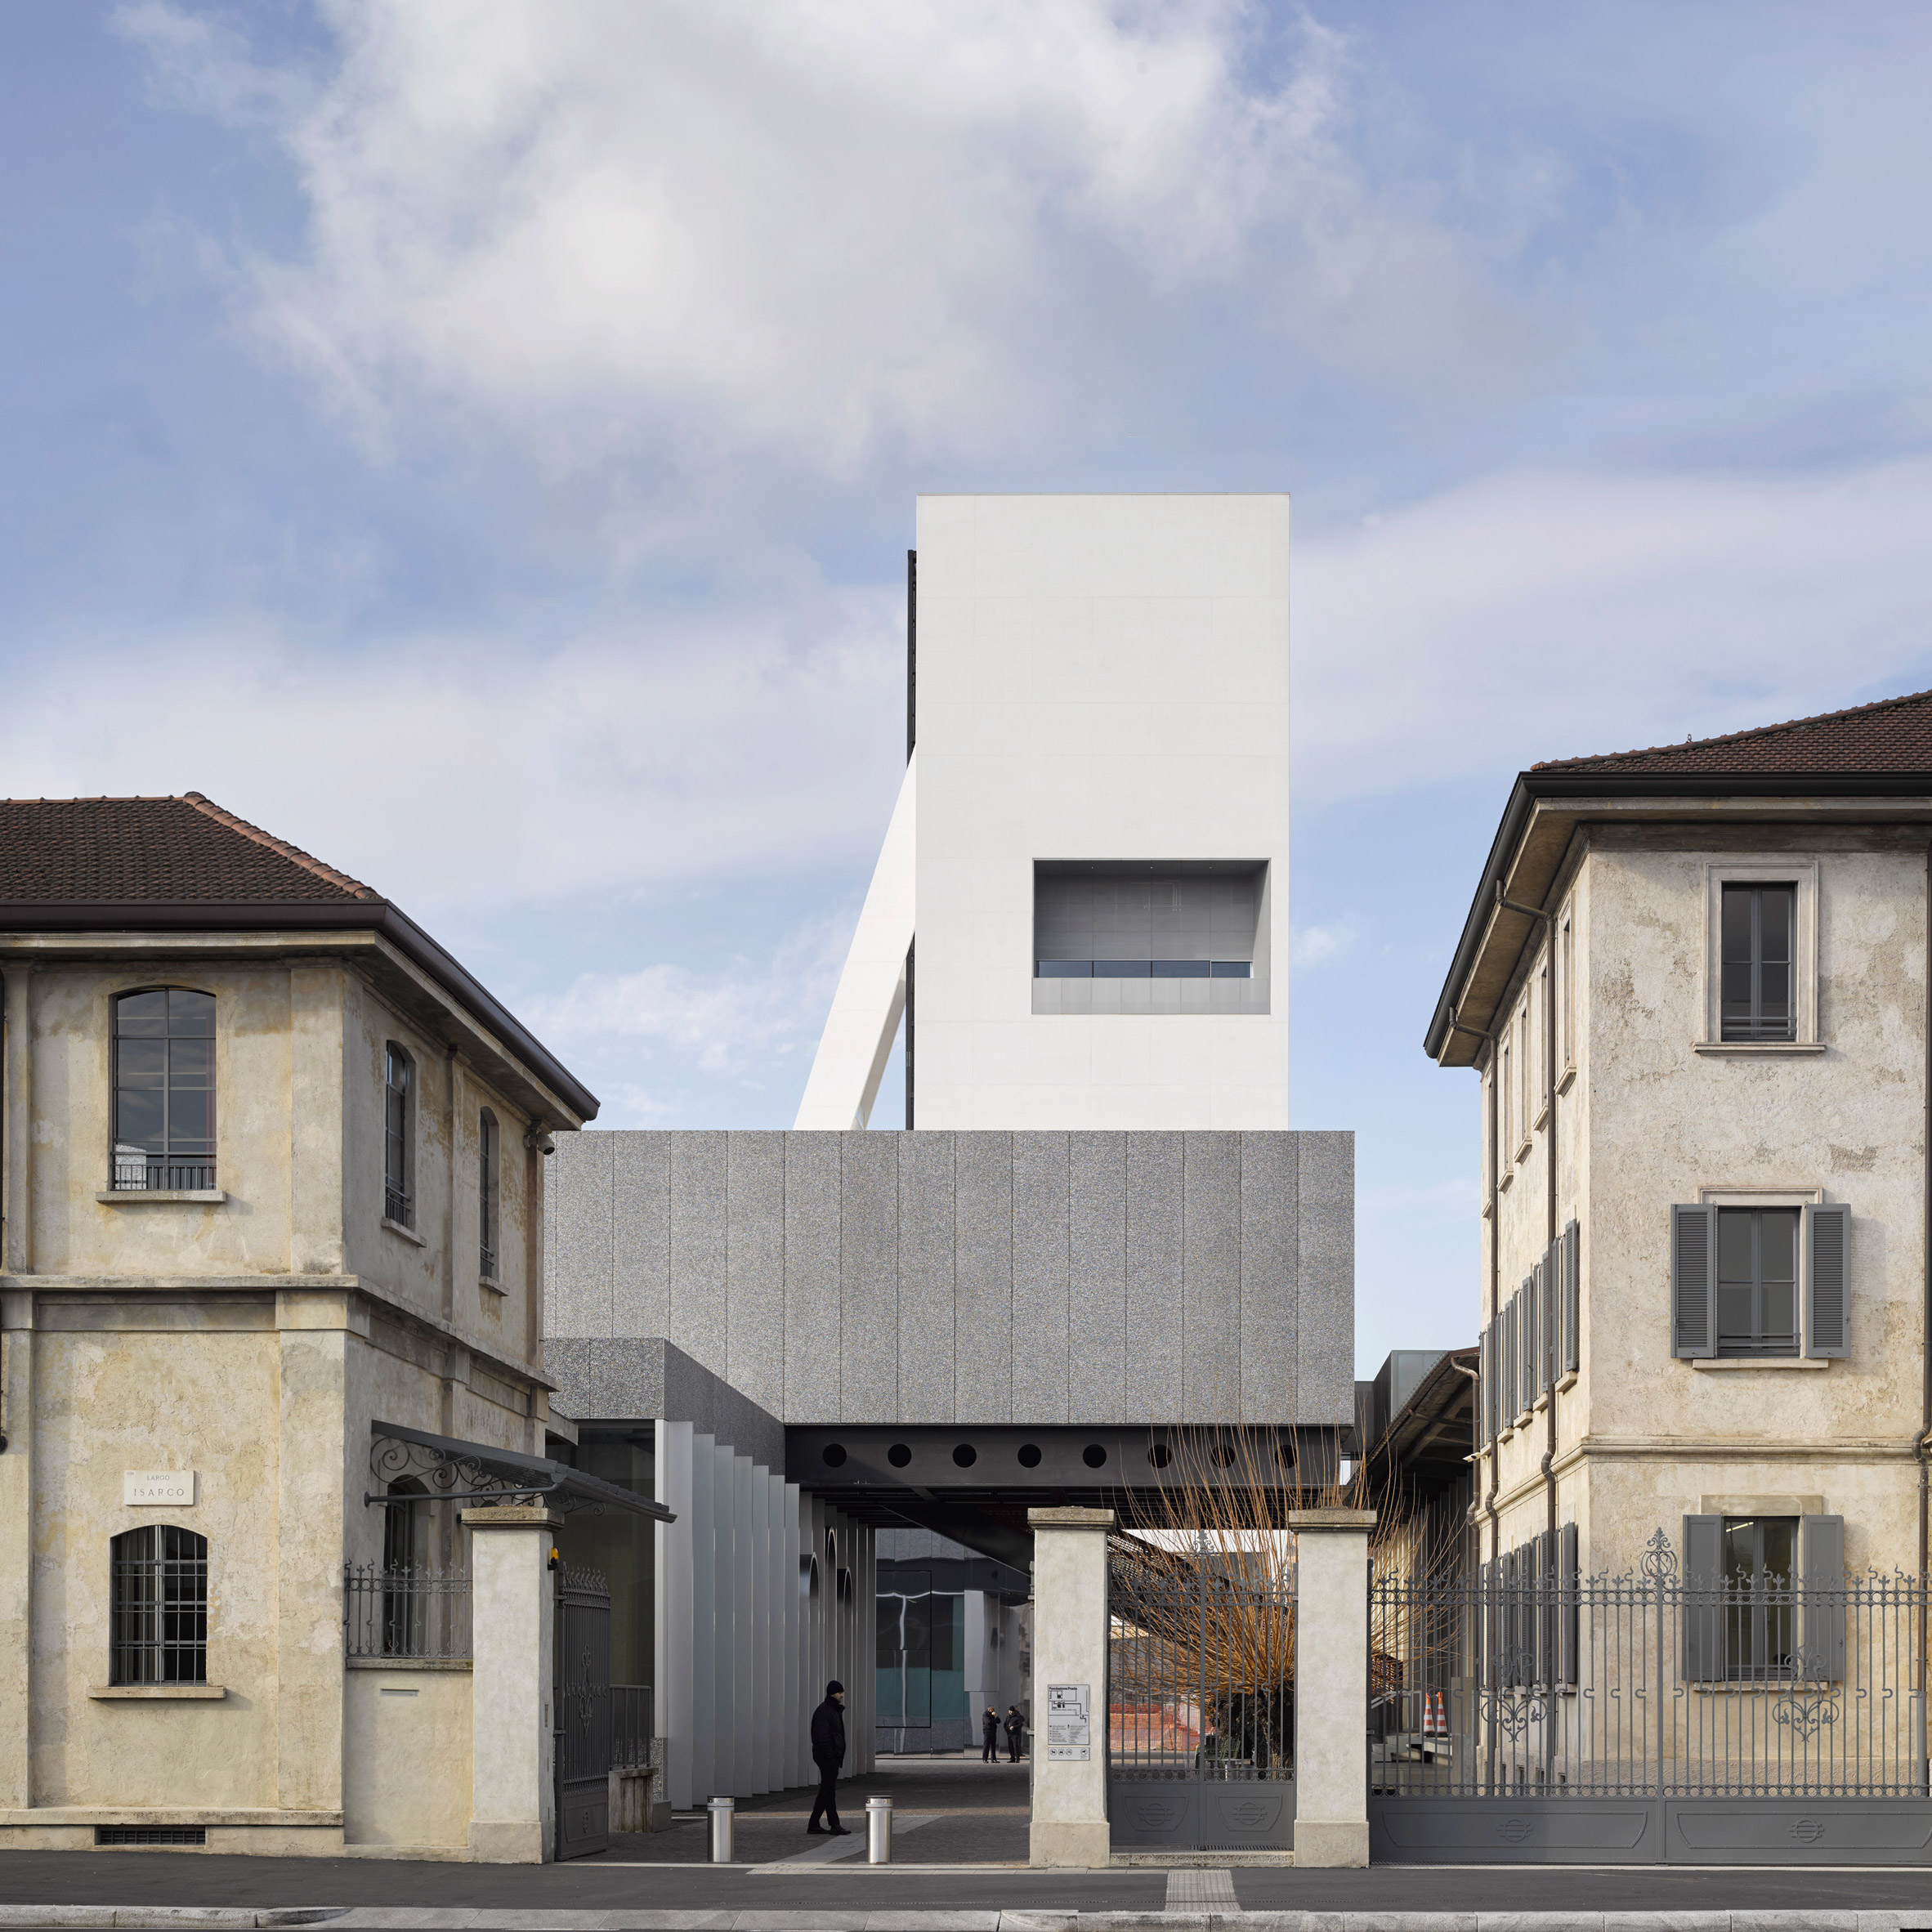 The opening of Torre marks the completion of Fondazione Prada's